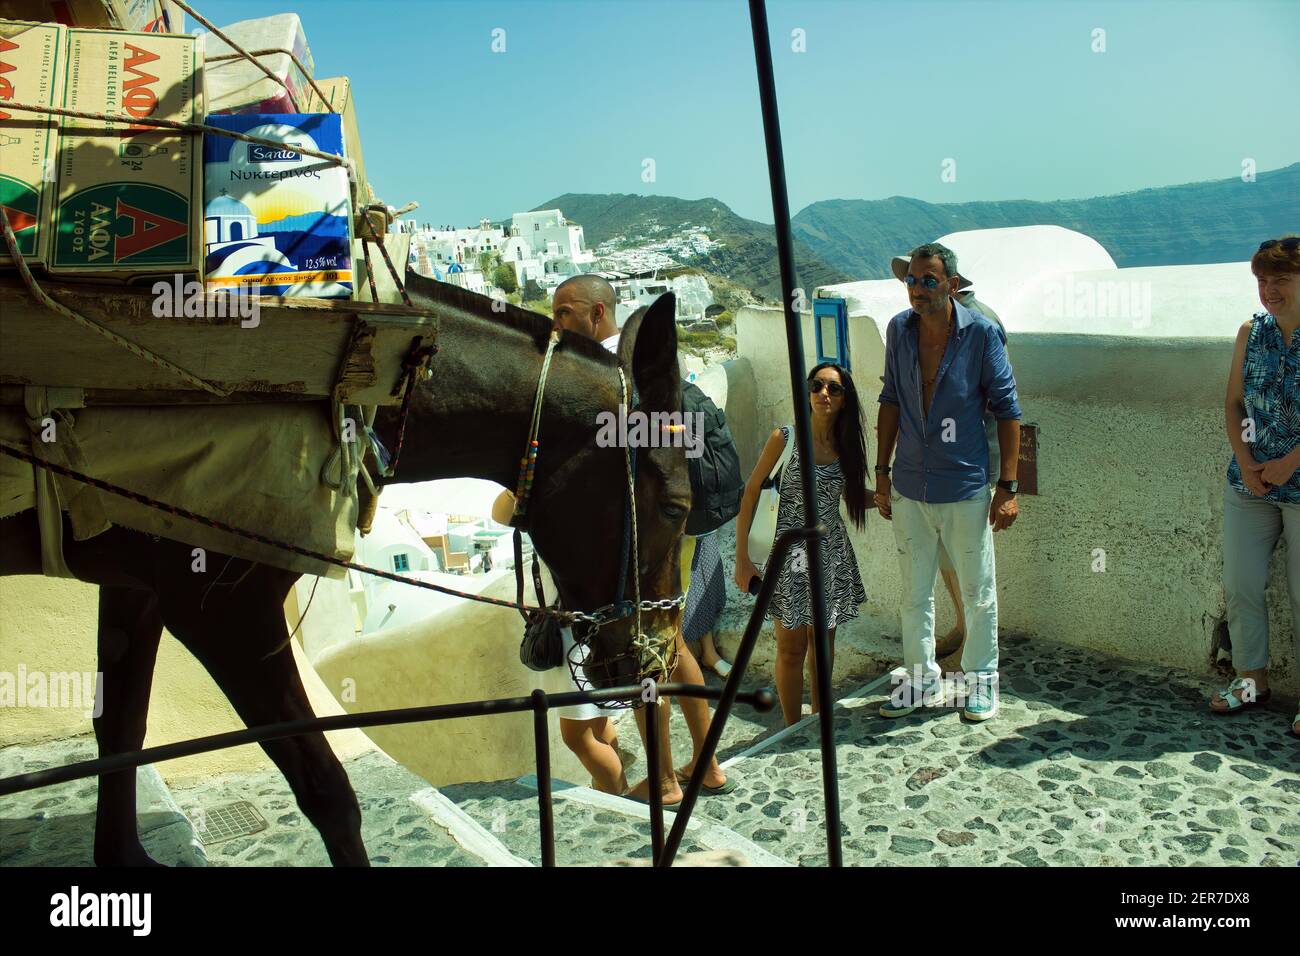 Santorini, Greece - September 11, 2017: A donkey or mule carrying weight of luggage, Luggage porter uses a donkey to navigate the narrow and steep pat Stock Photo